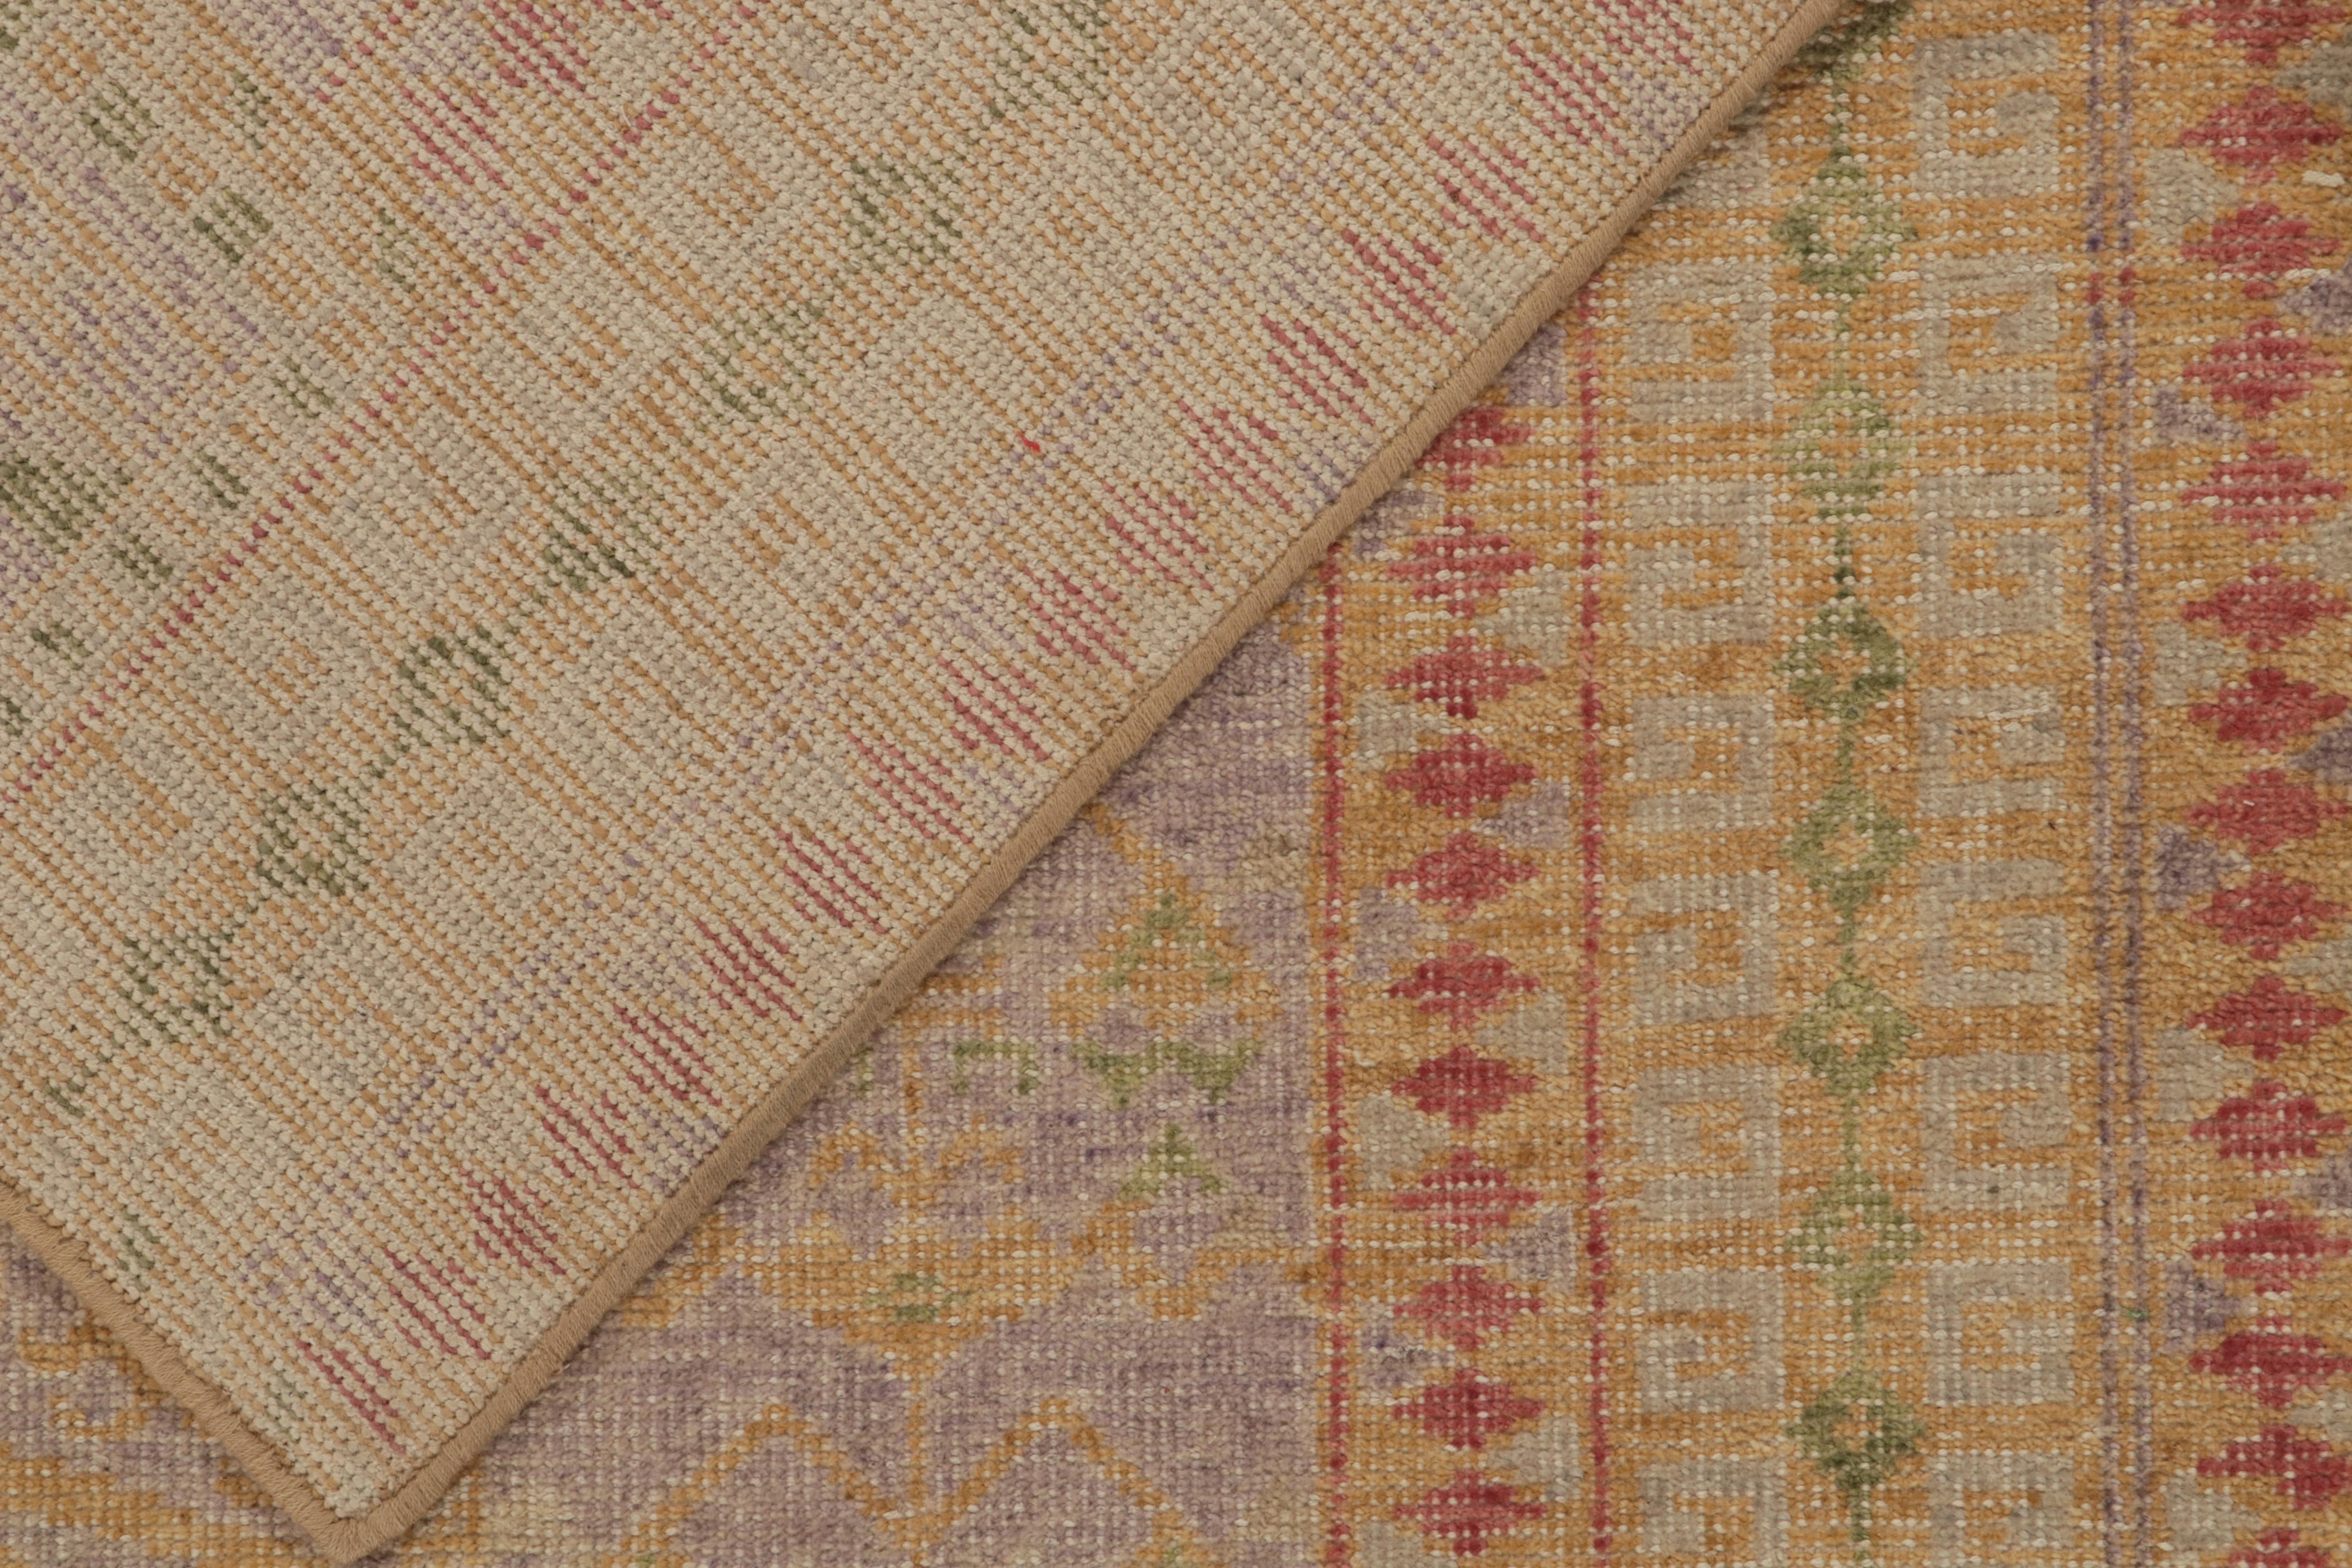 Contemporary Rug & Kilim’s Distressed Style Rug in Beige-Brown, Green, Lavender Patterns For Sale